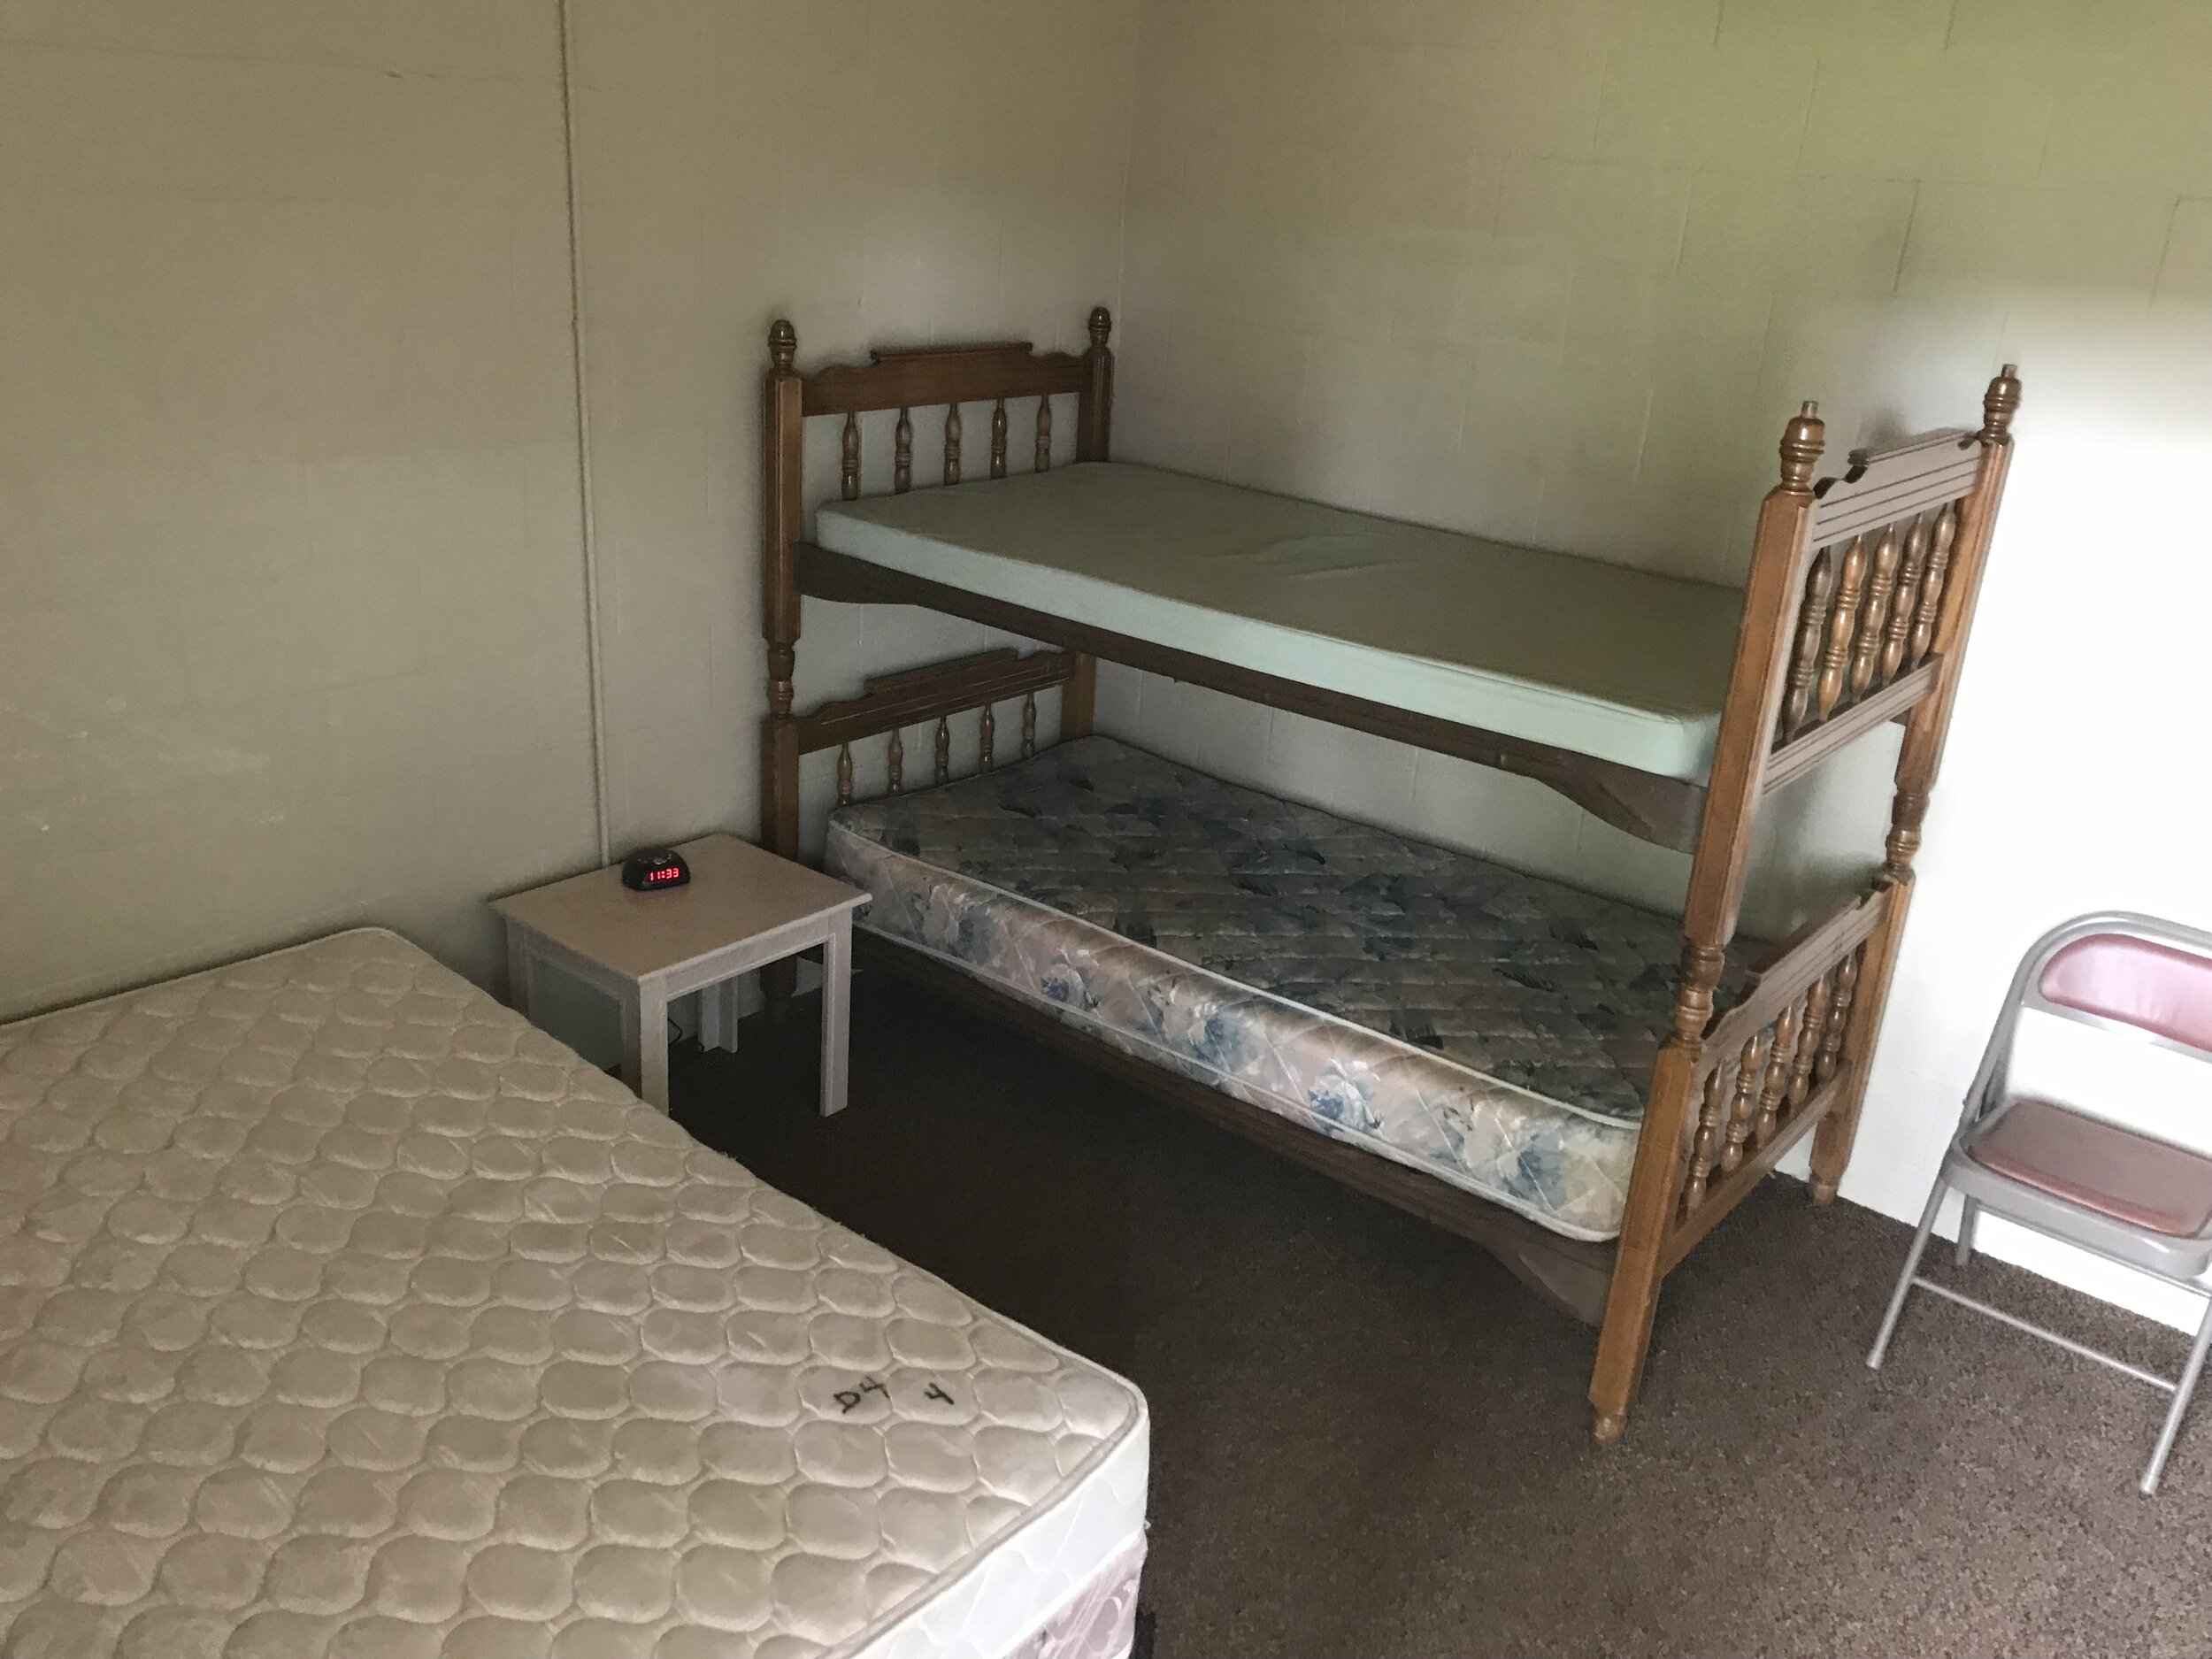  Private rooms range from King, queen, full, and bunk beds with anywhere from 1-5 beds per room. Many rooms feature a couch, desk, closet wardrobe, minifridge, and more. All sleeping quarters are air conditioned.  